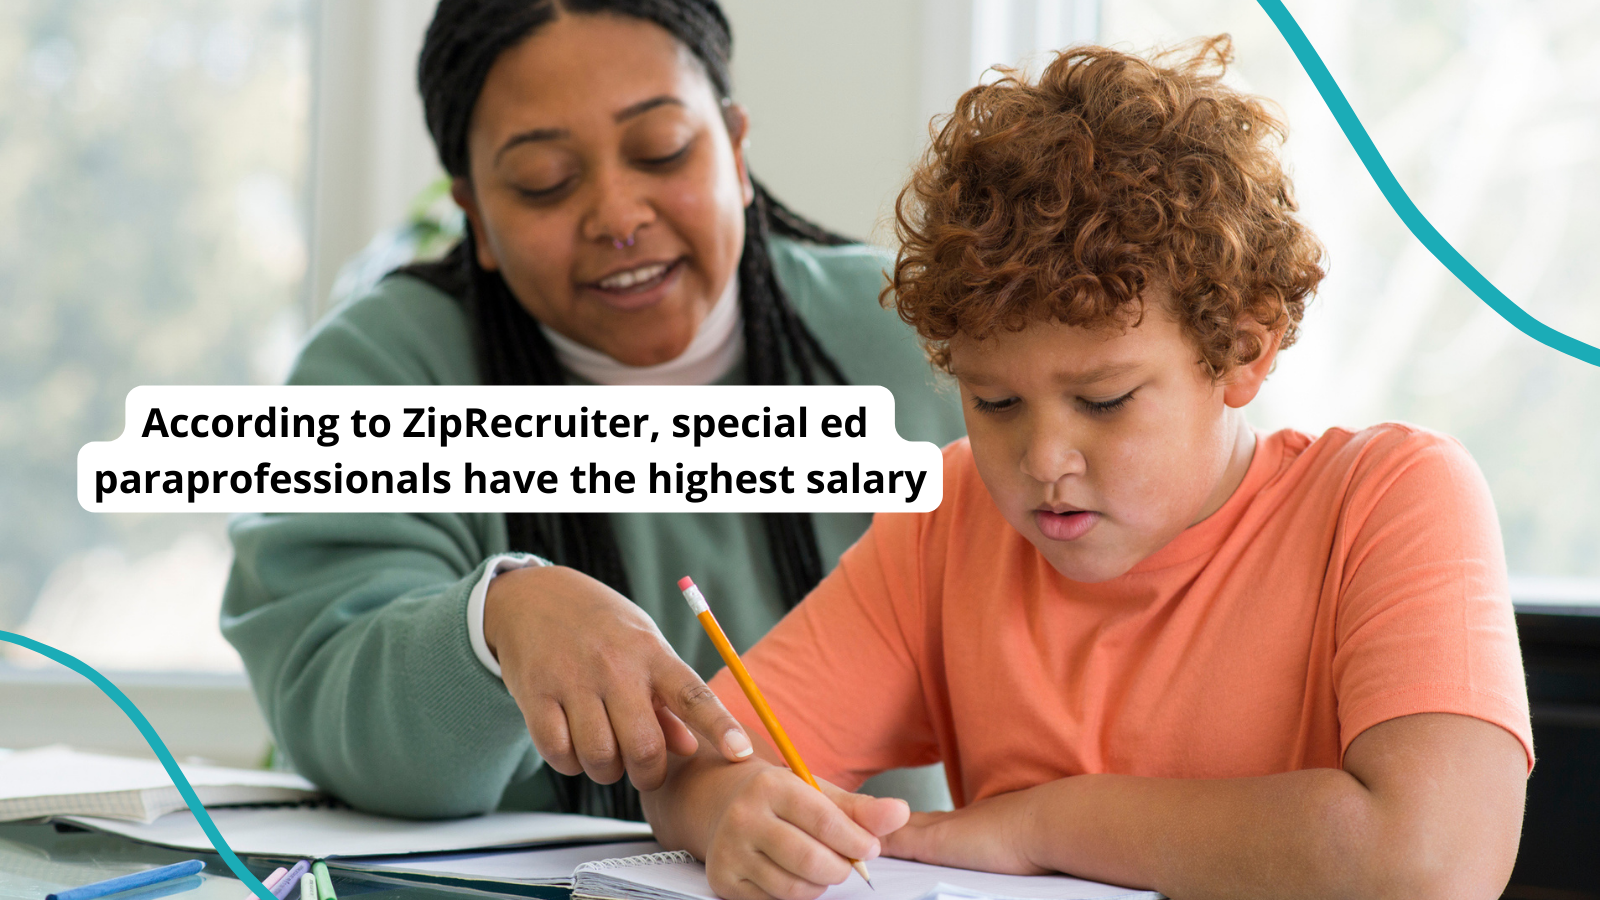 Special education paraprofessional sitting at desk with student and helping him with schoolwork with text that says According to ZipRecruiter, special ed paraprofessionals have the highest salary.